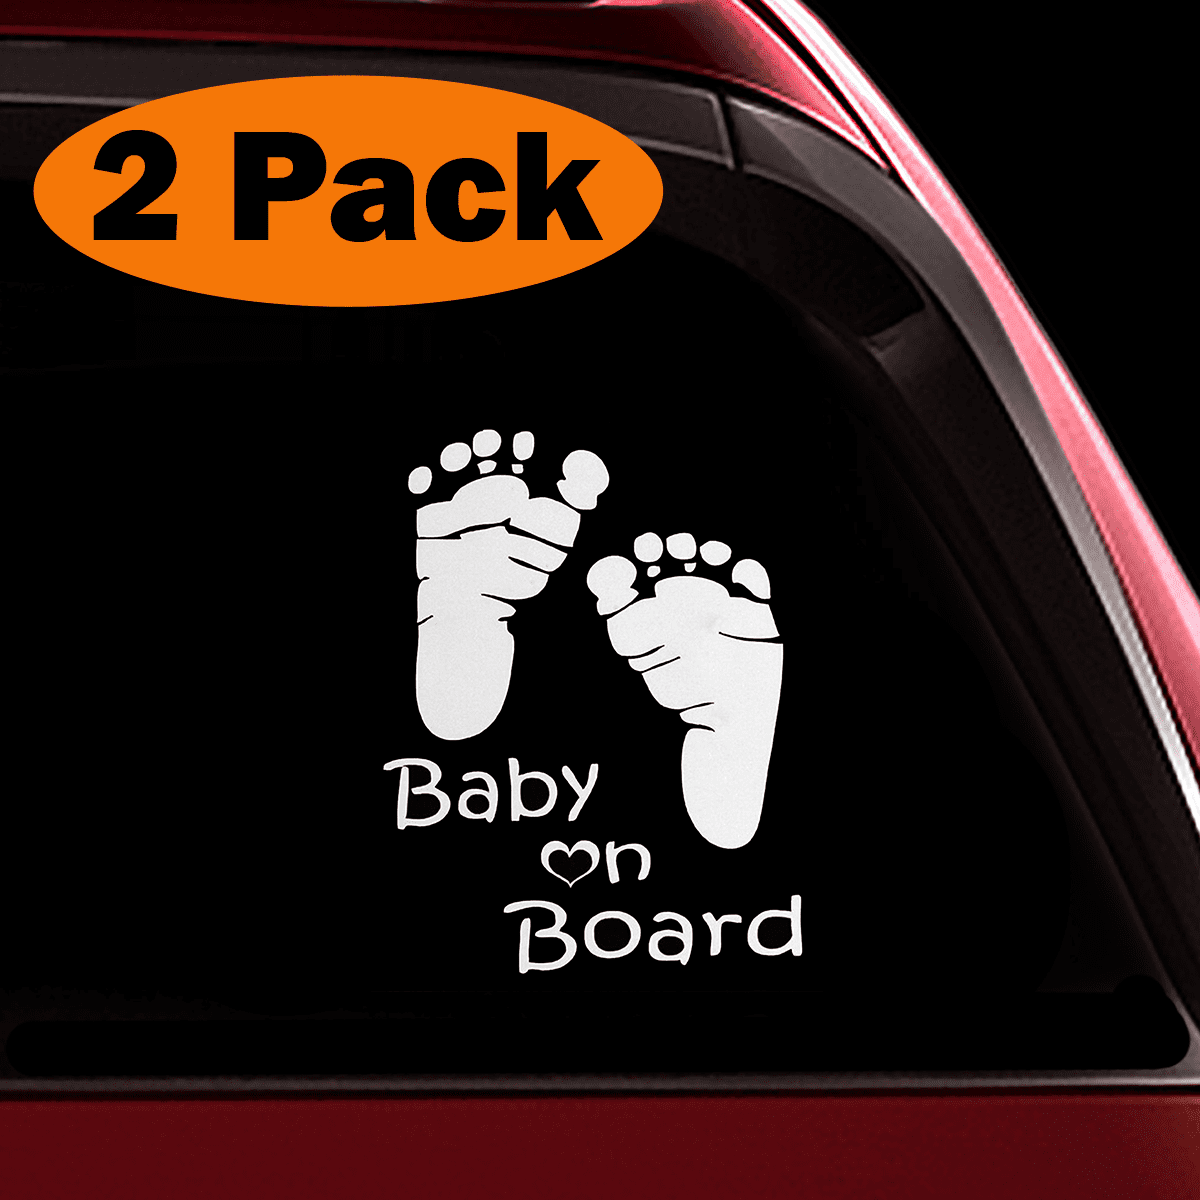 NEW BABY ON BOARD CHILD SAFETY SUCTION CUPS CAR VEHICLE BABY ON BOARD CAR SIGN 